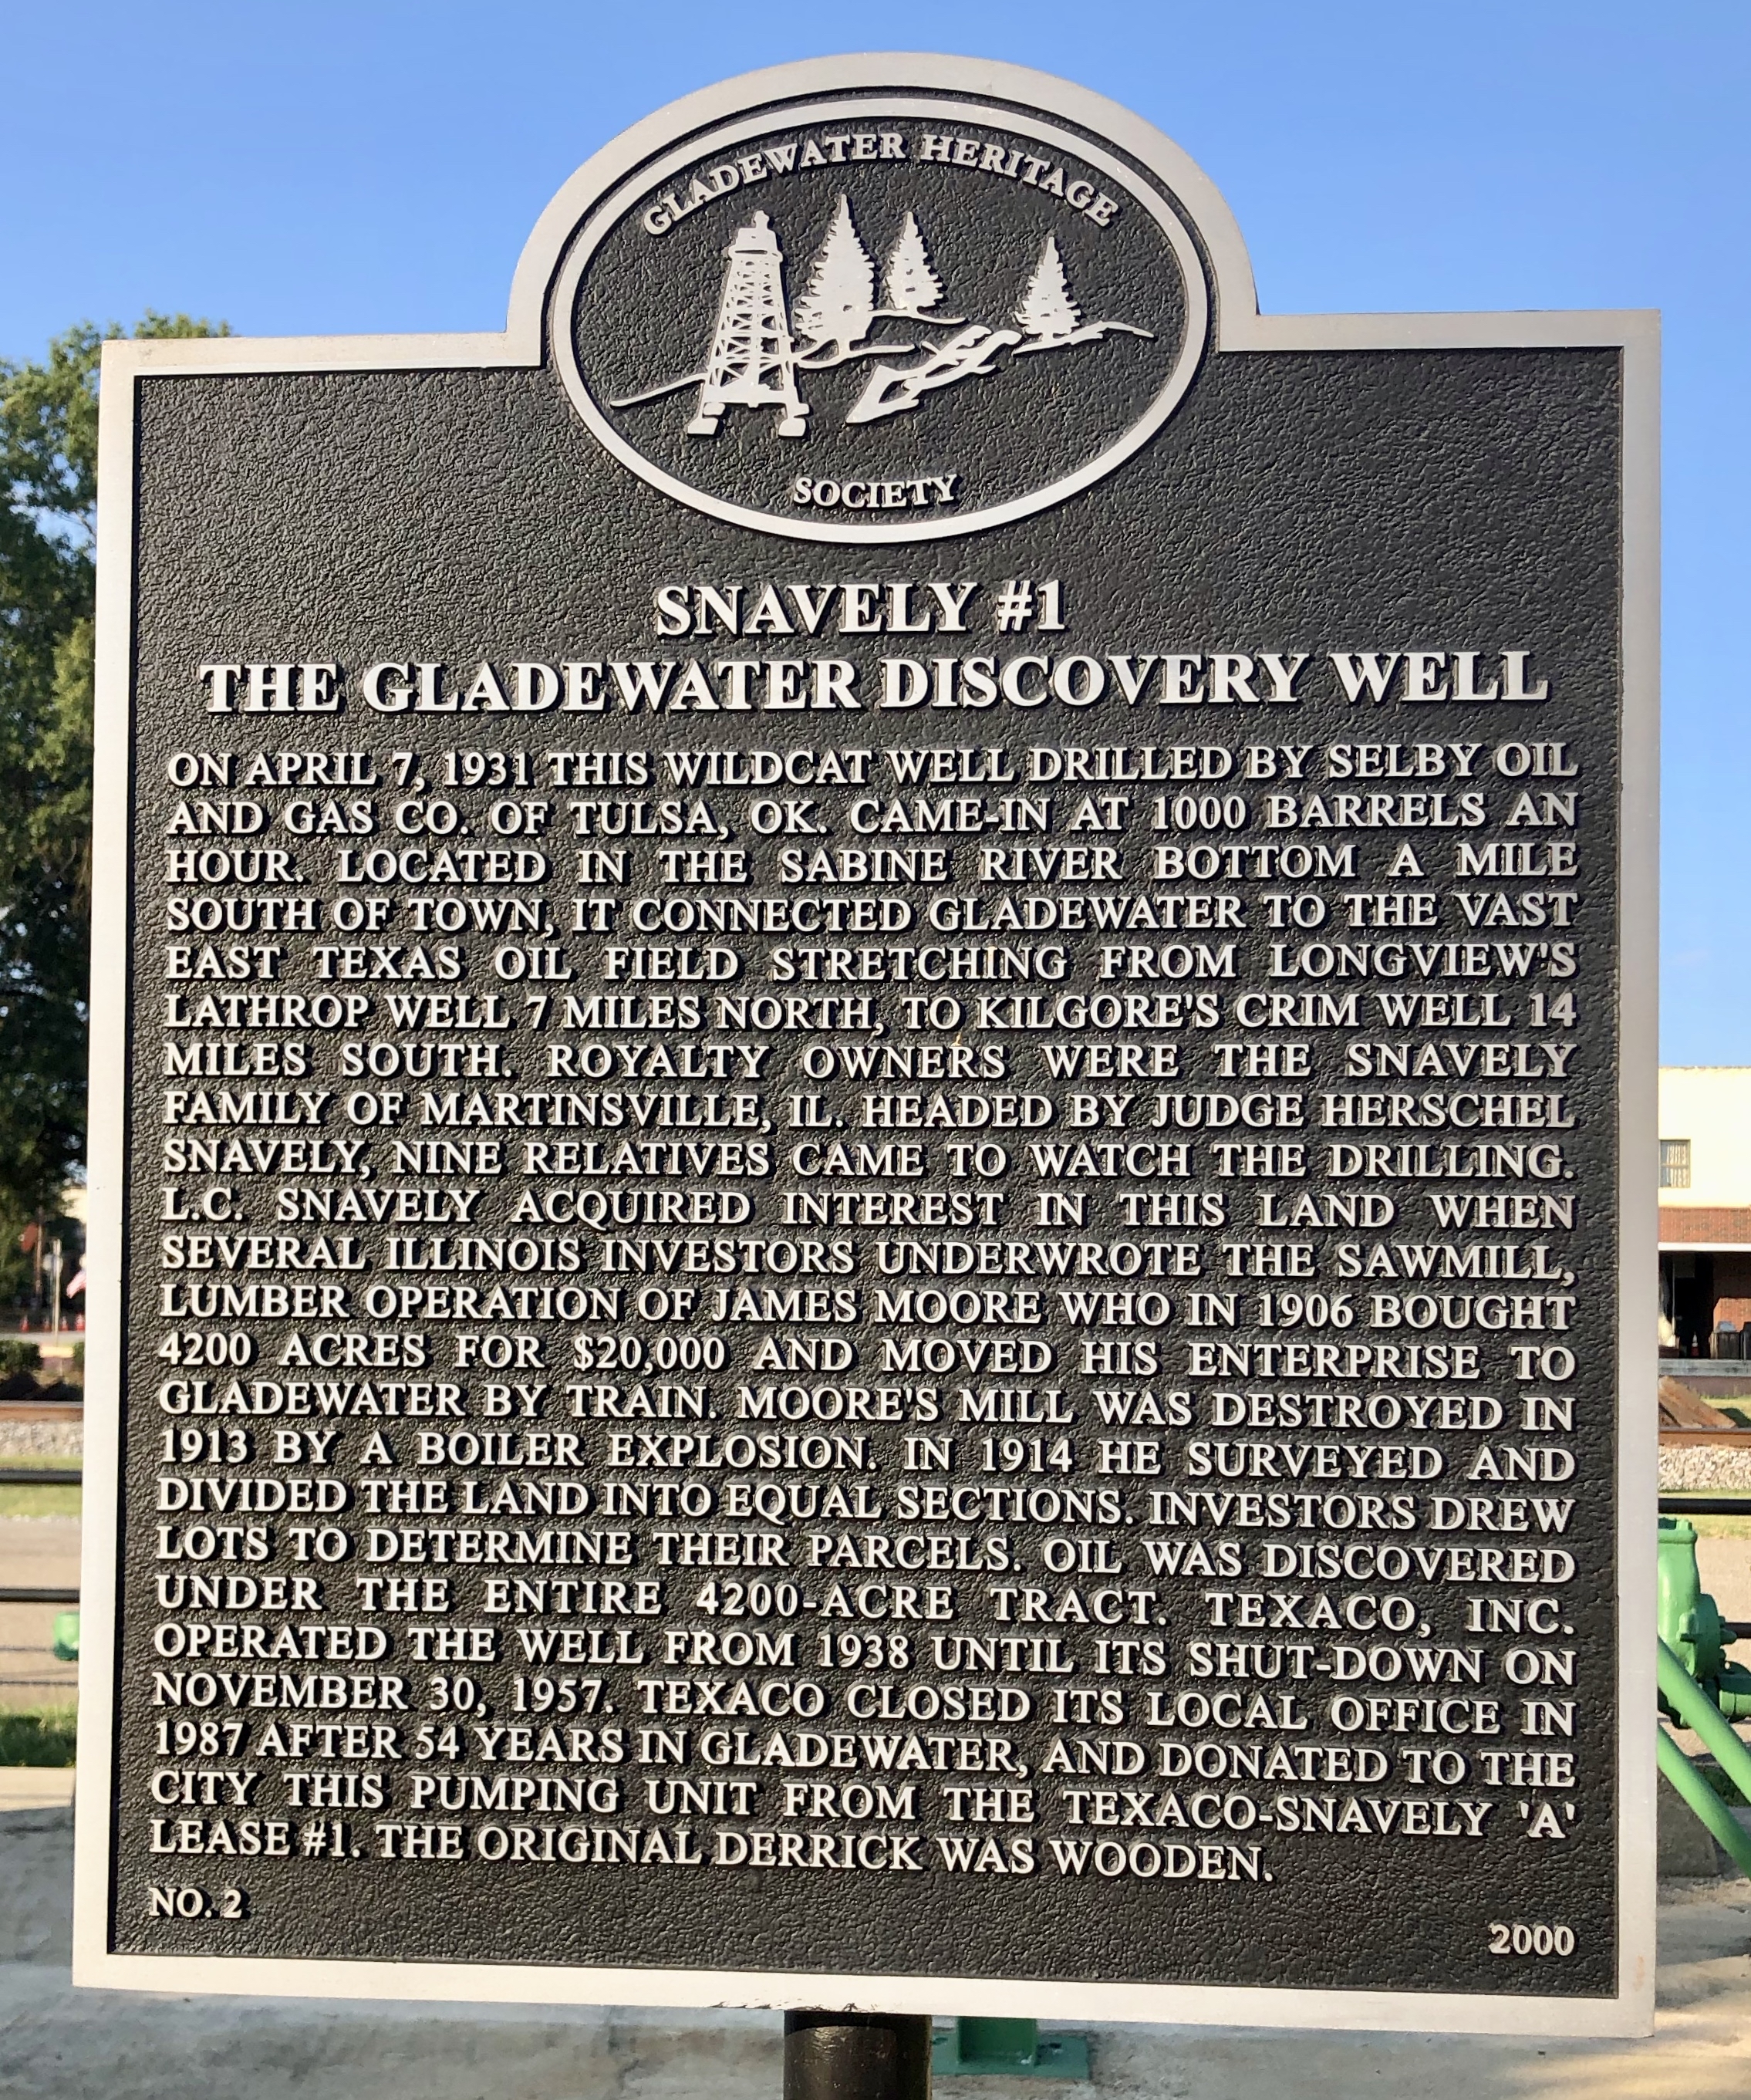 The Gladewater Discovery Well Marker